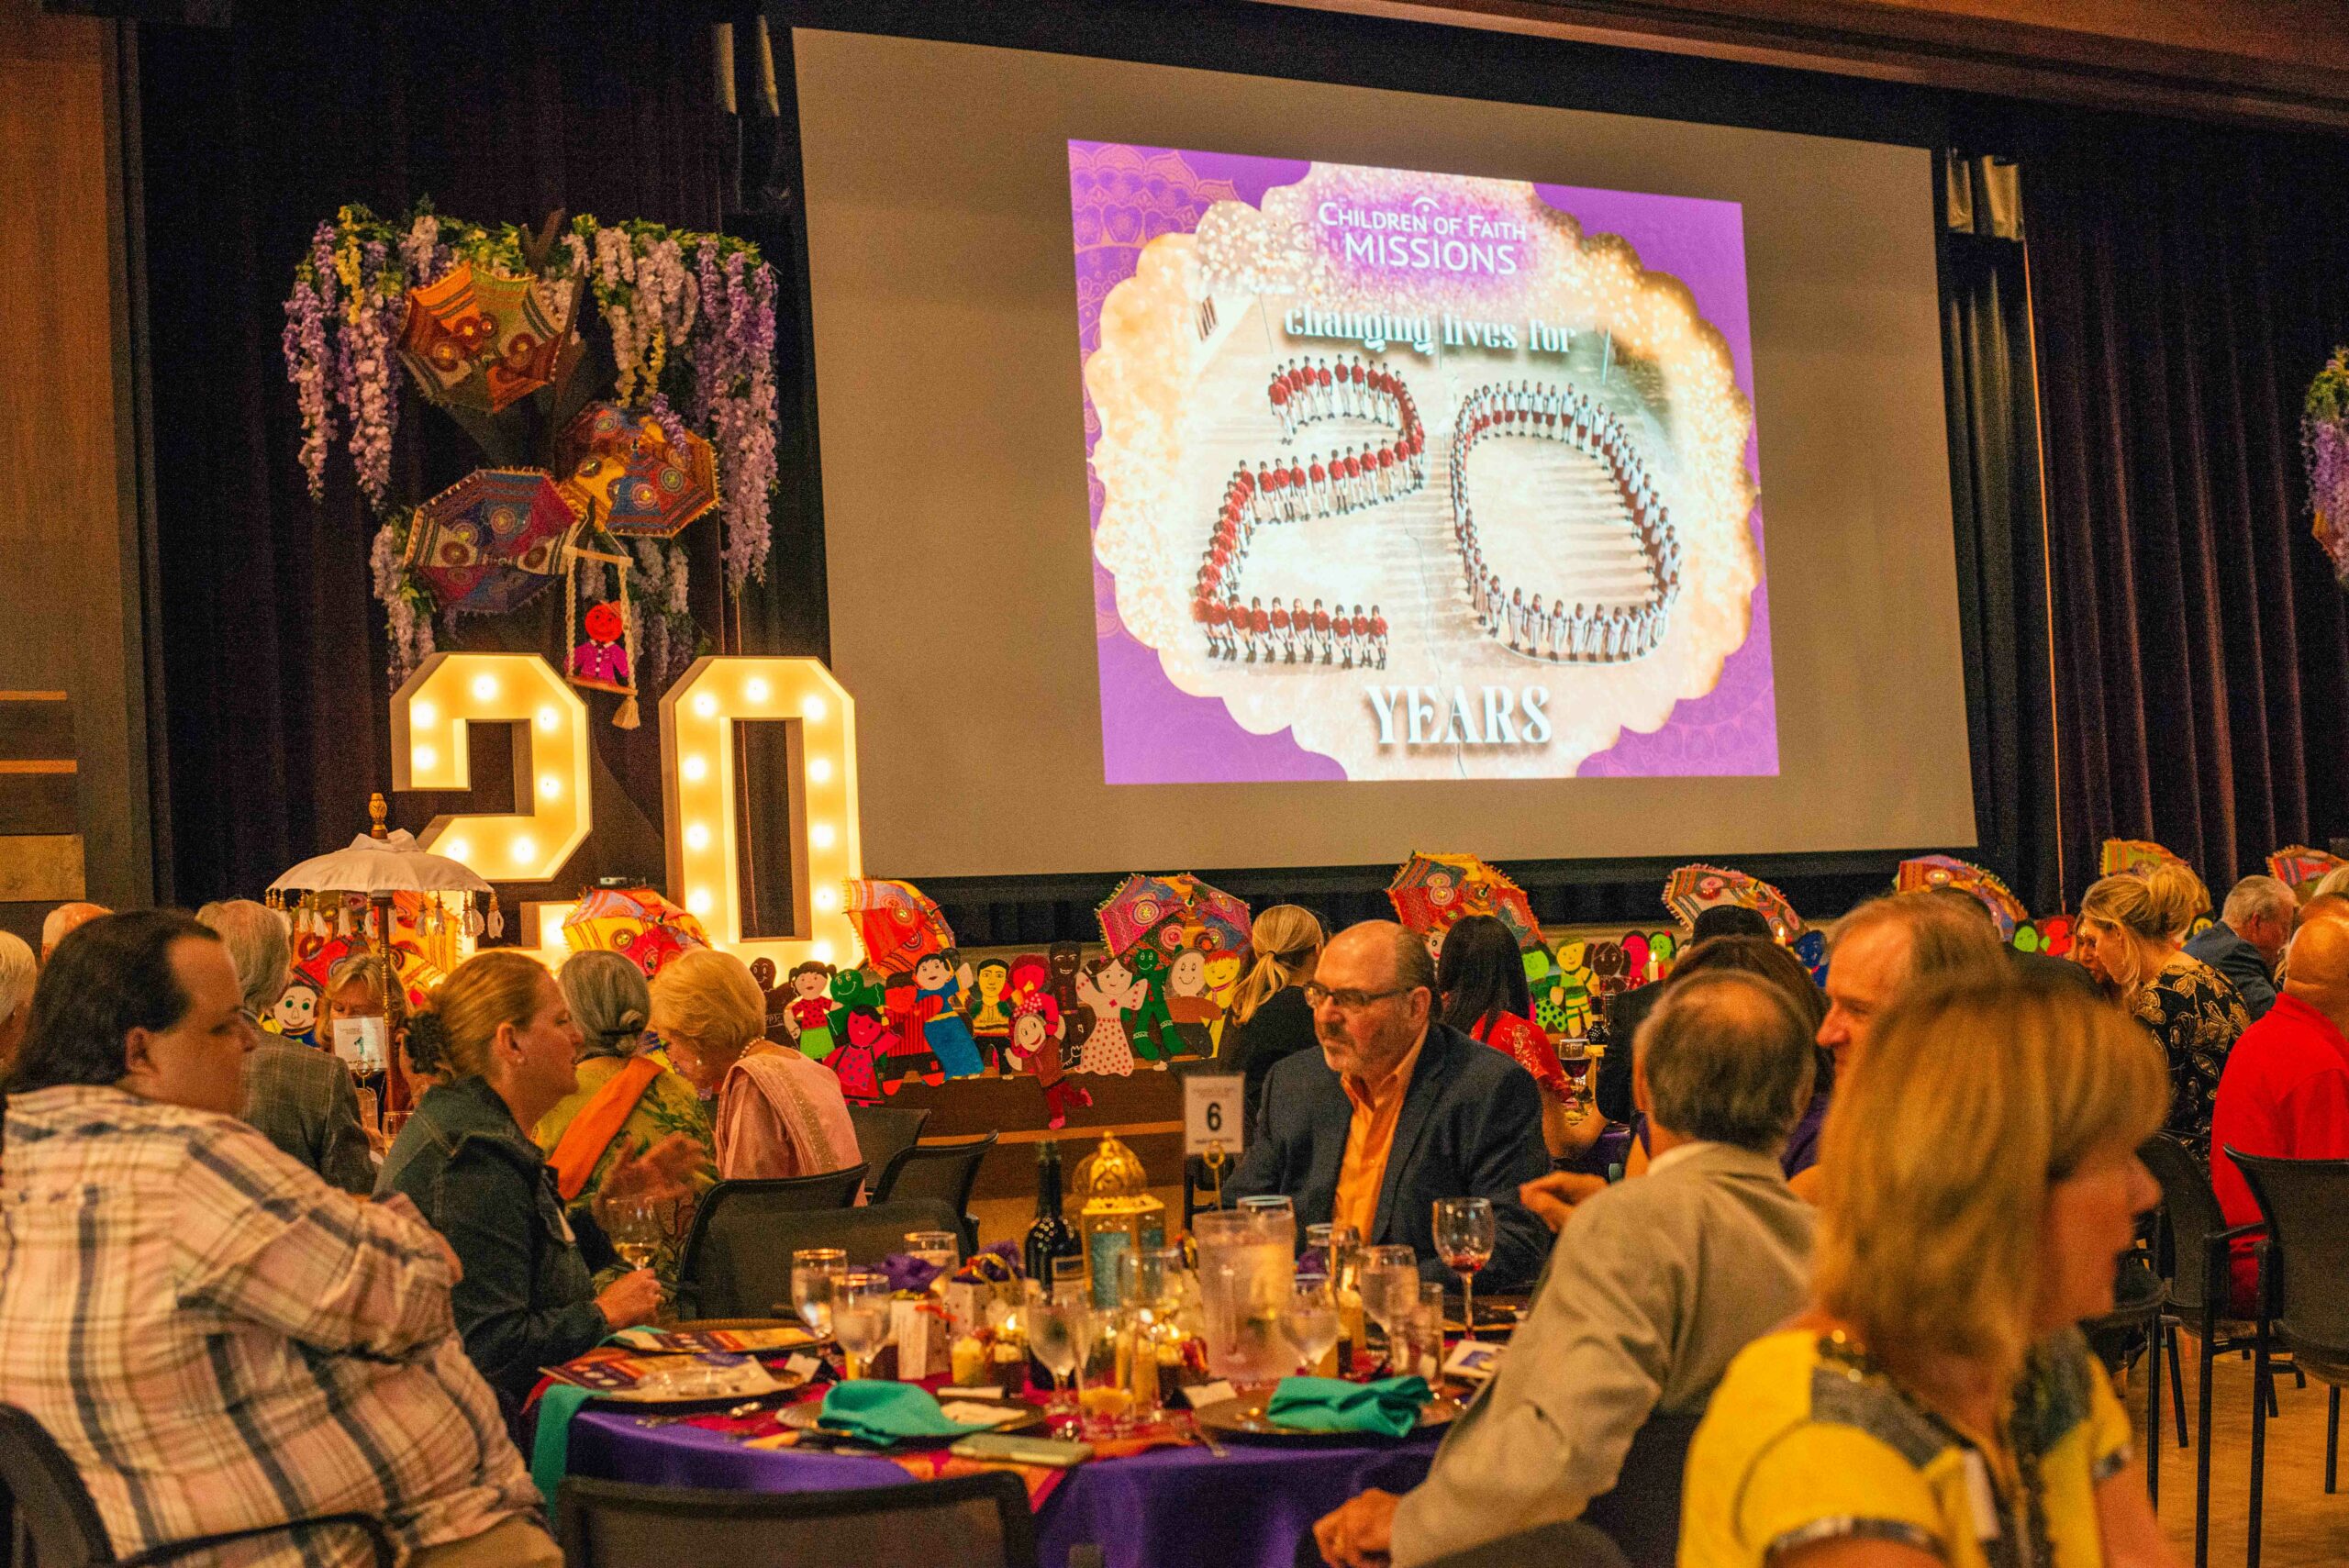 A few scenes from our 20th Anniversary Celebration